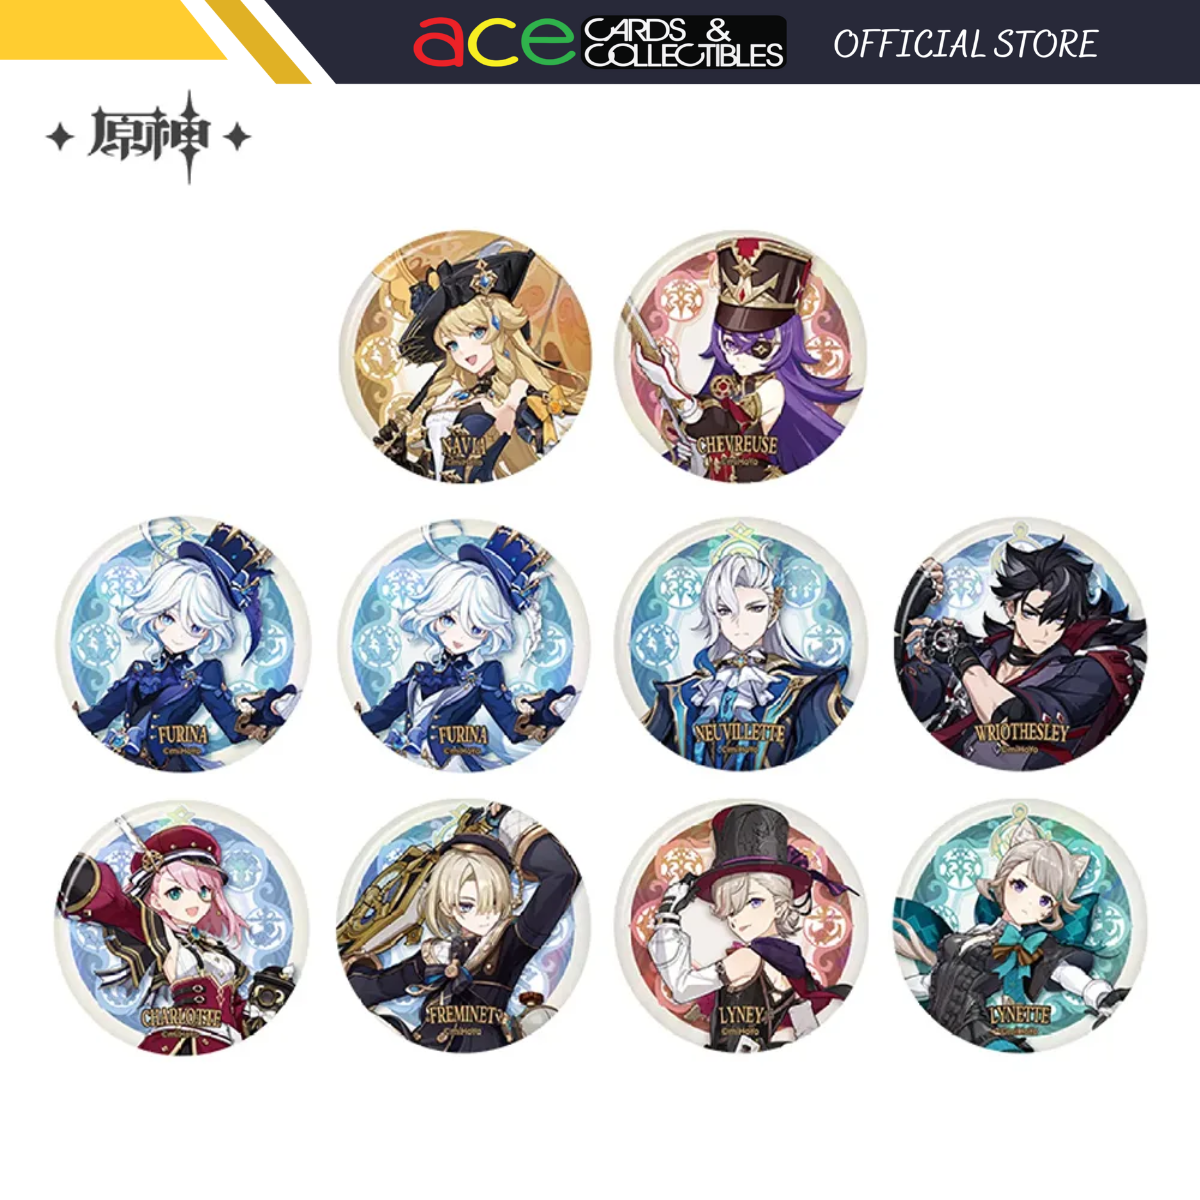 miHoYo Genshin Impact Character Tin Badge Court of Fontaine-Navia-miHoYo-Ace Cards & Collectibles